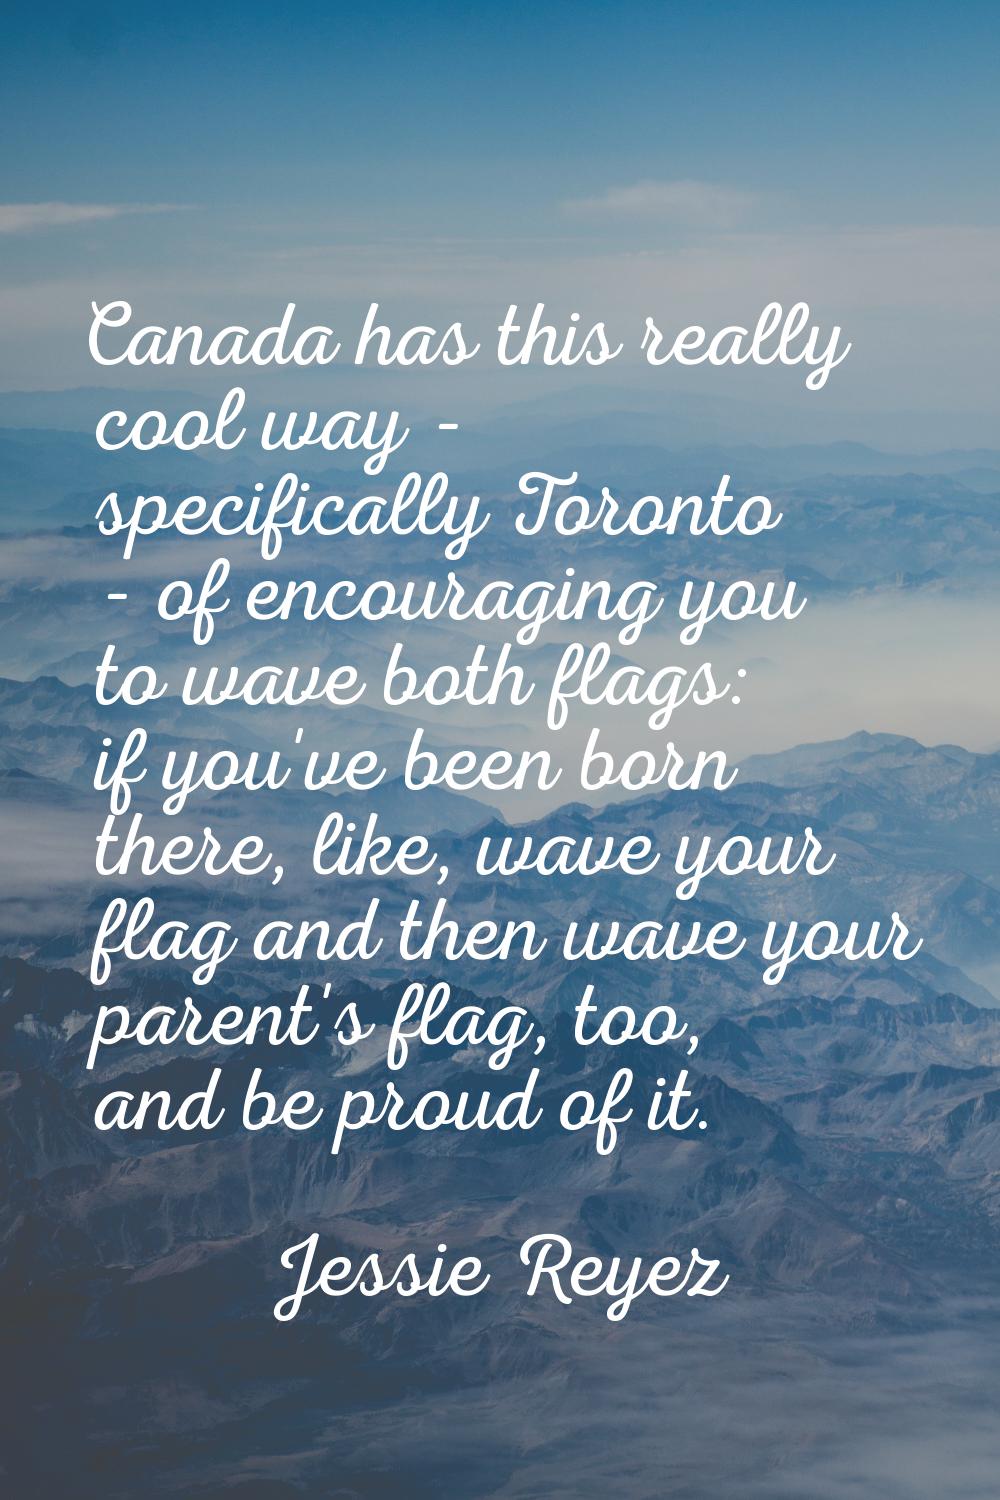 Canada has this really cool way - specifically Toronto - of encouraging you to wave both flags: if 